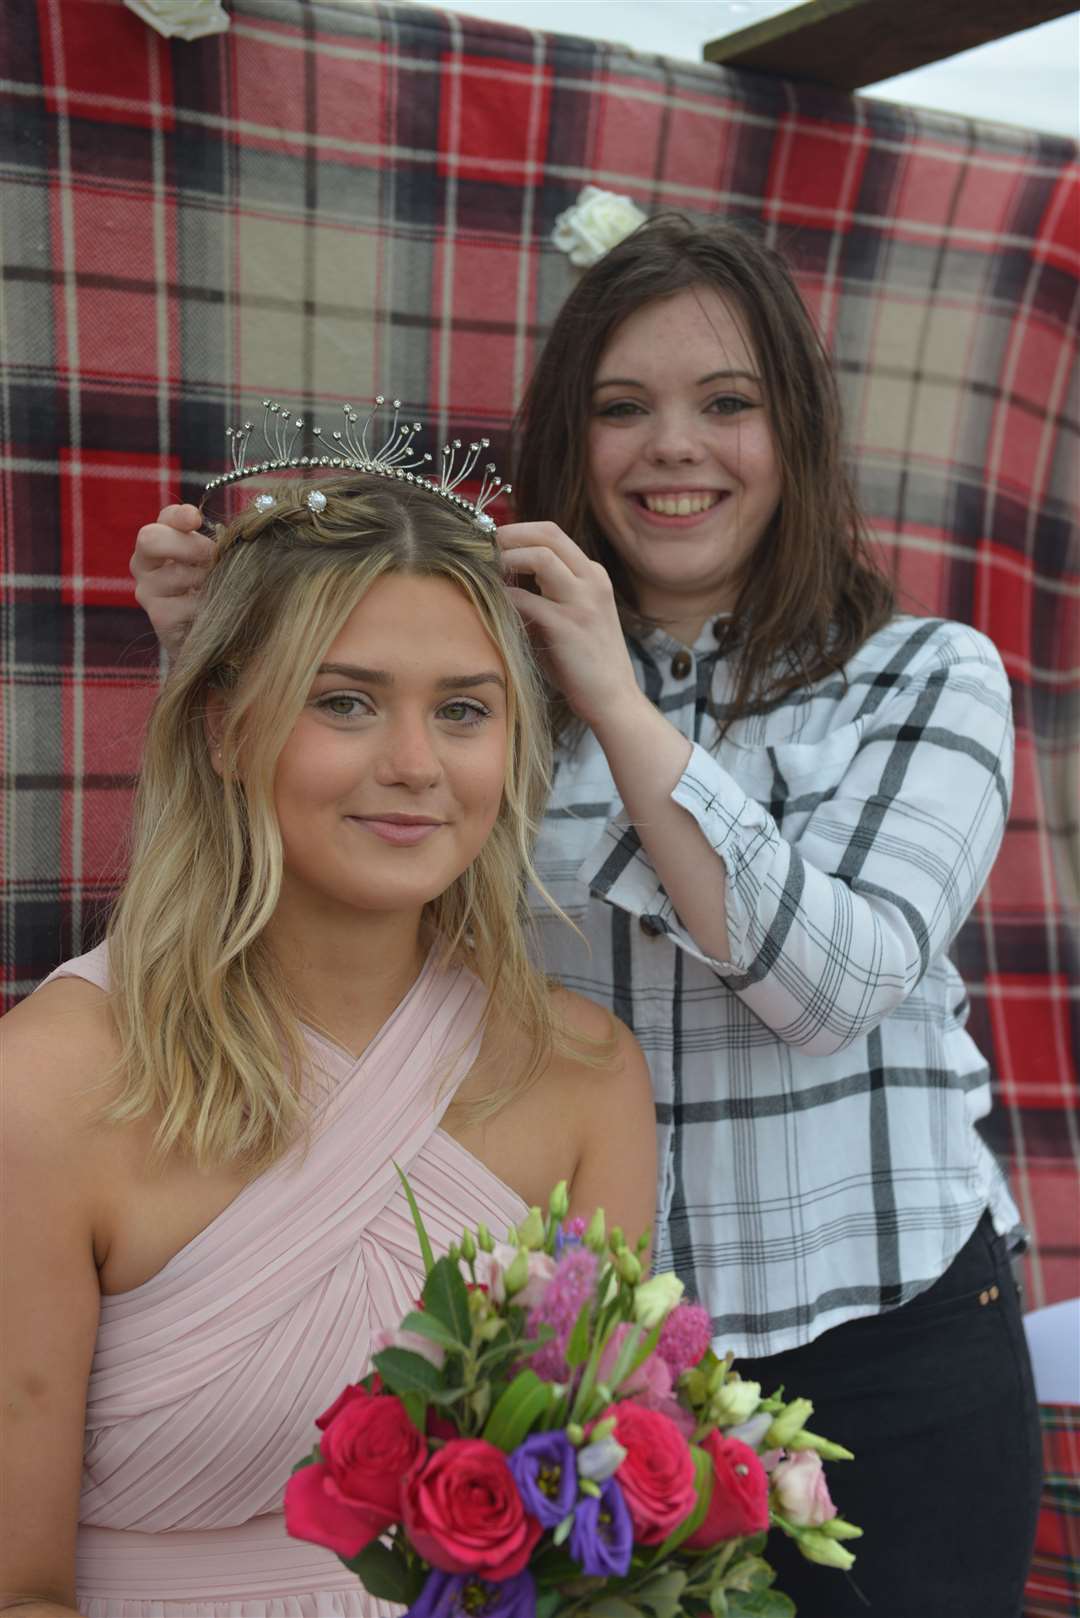 Gala Queen Murron Drennan is crowned by the previous Gala Queen, Anna Magee. Picture: Jim A Johnston